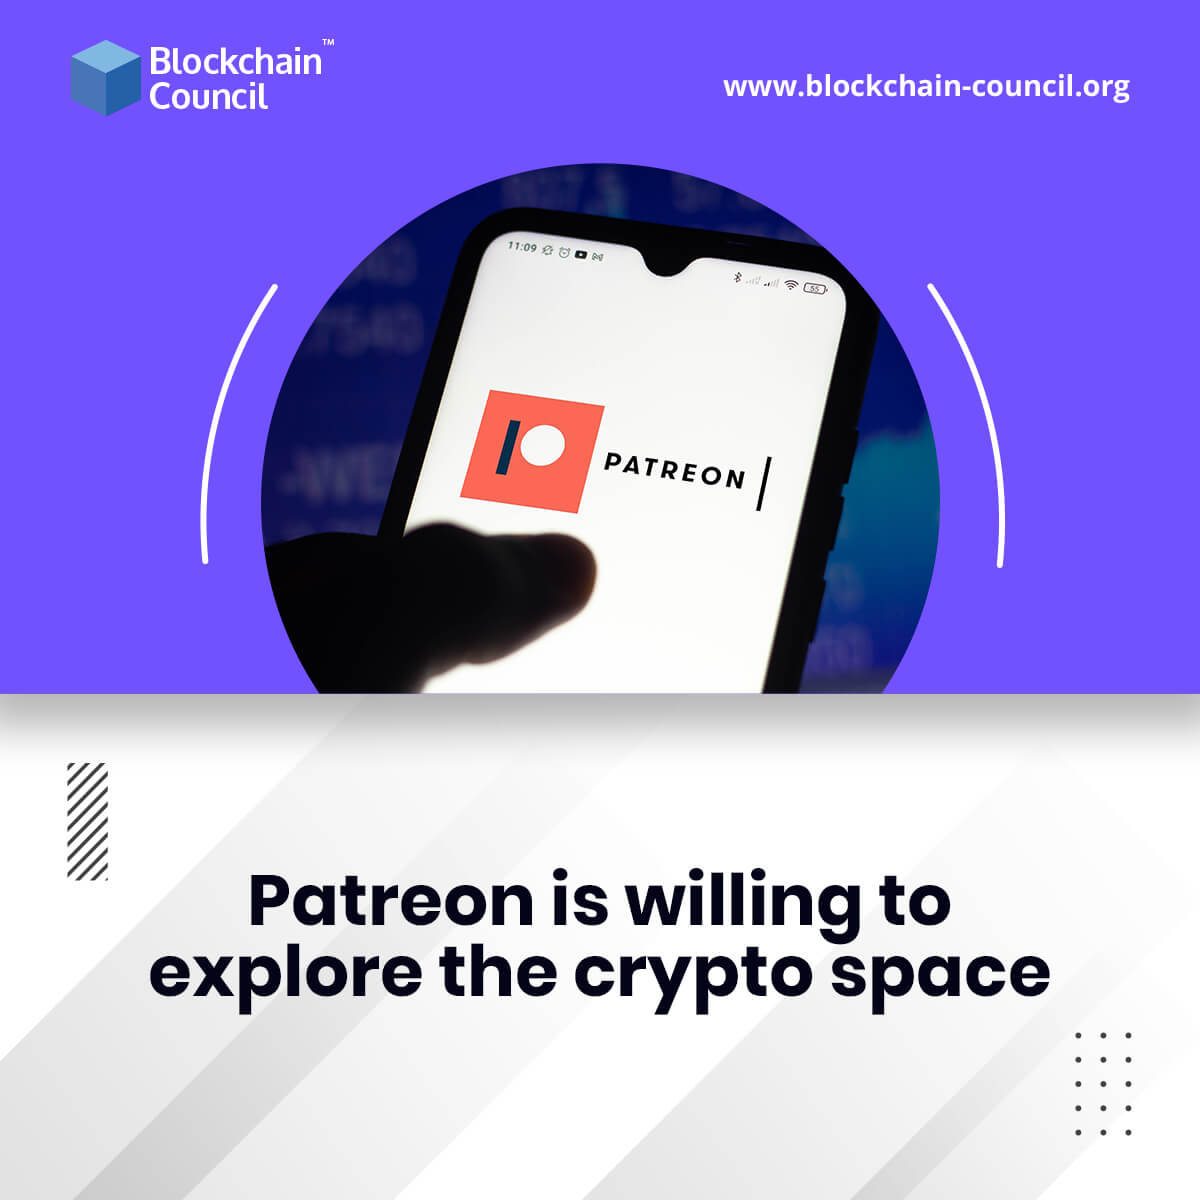 Patreon is willing to explore the crypto space